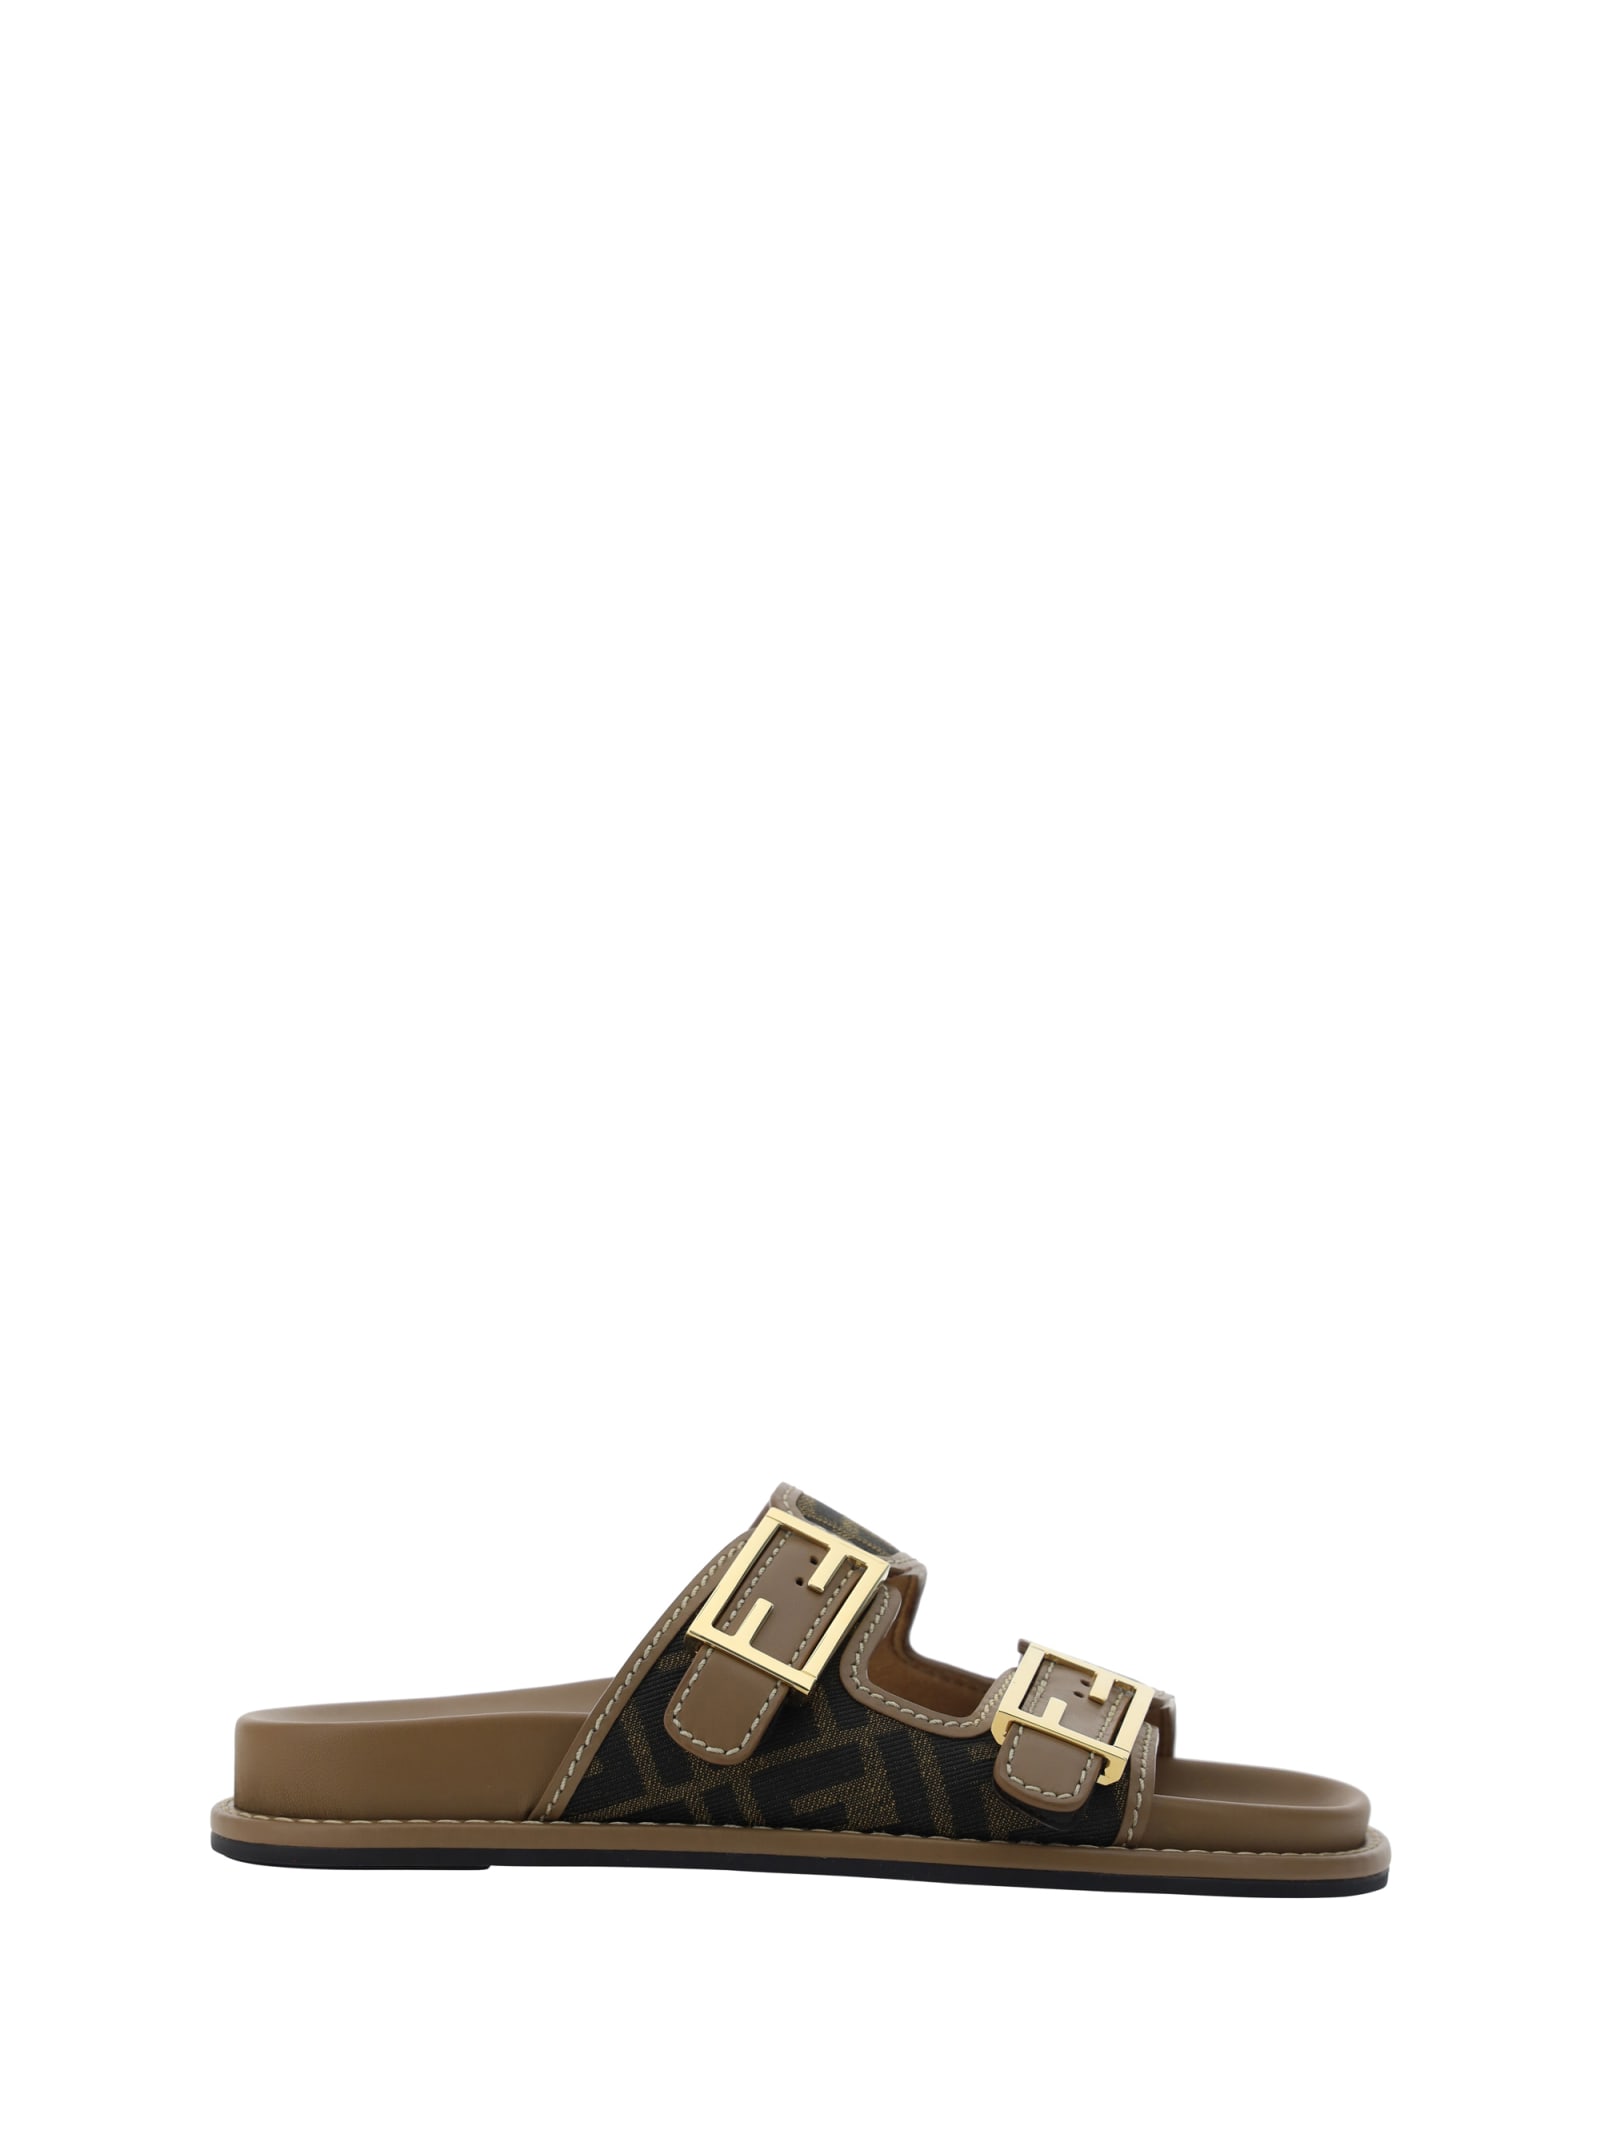 Fendi Sandals In Tabac.ner+miele Scur